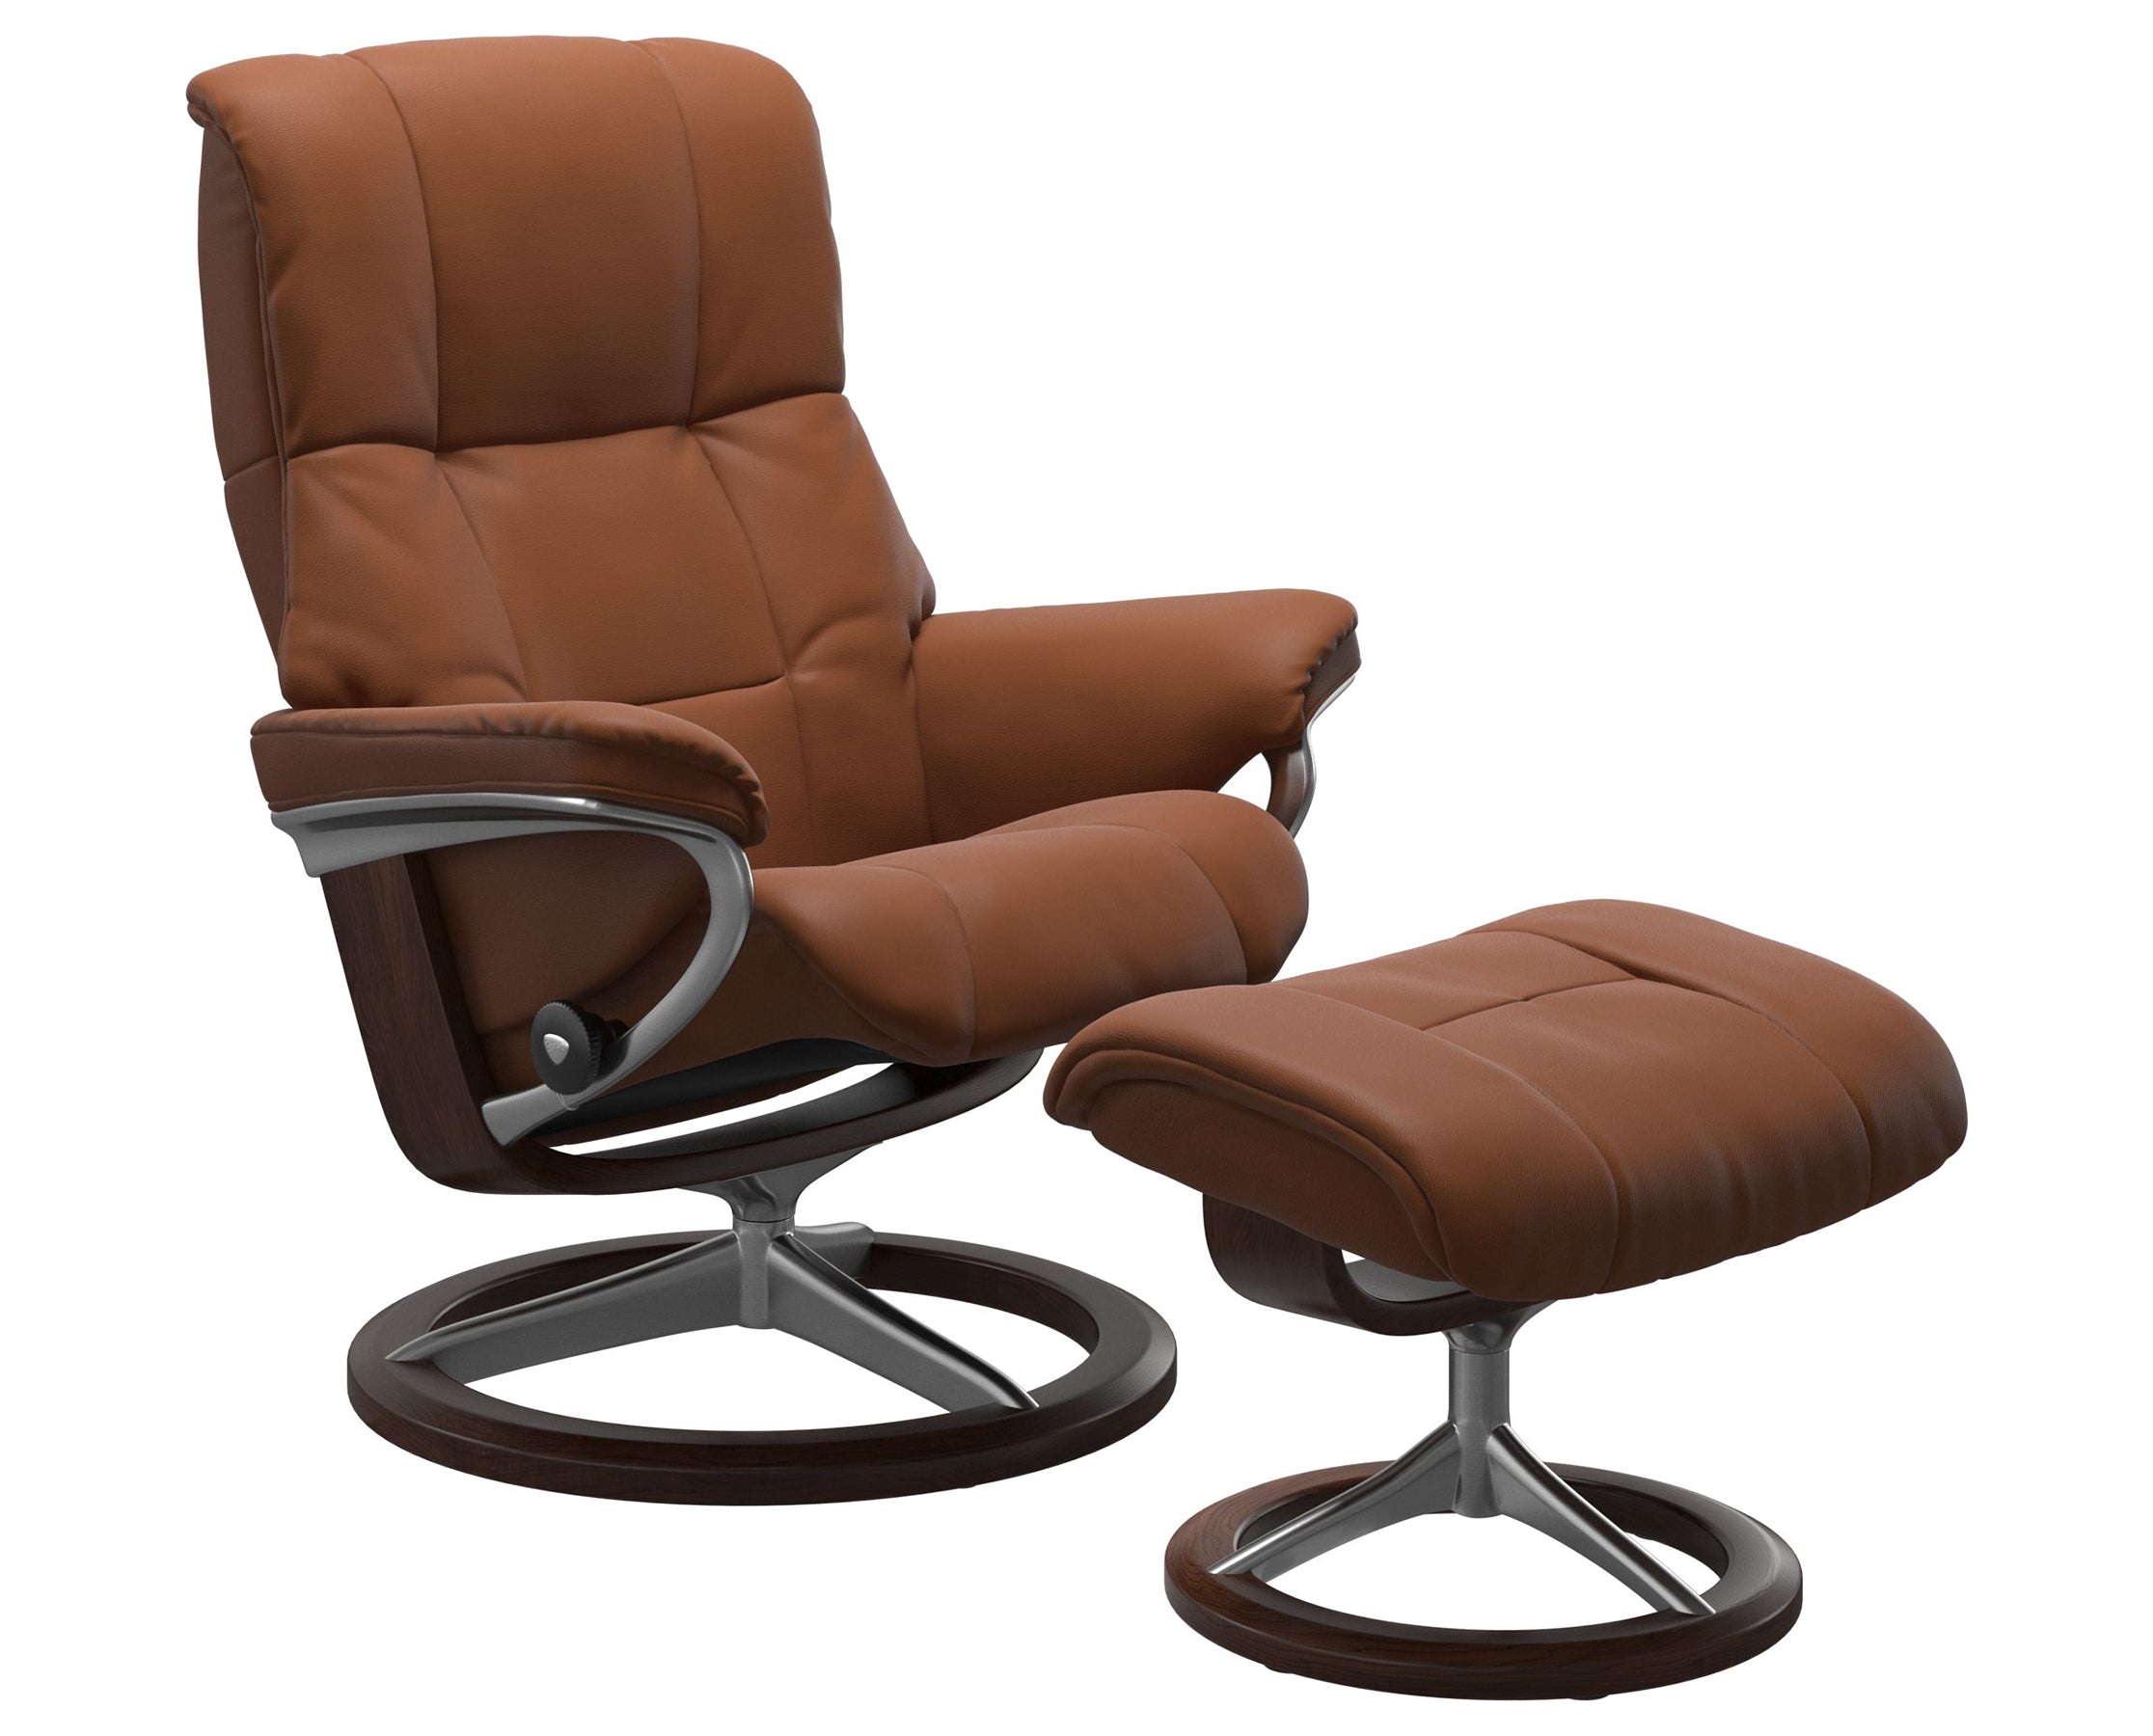 Paloma Leather New Cognac S/M/L and Brown Base | Stressless Mayfair Signature Recliner | Valley Ridge Furniture